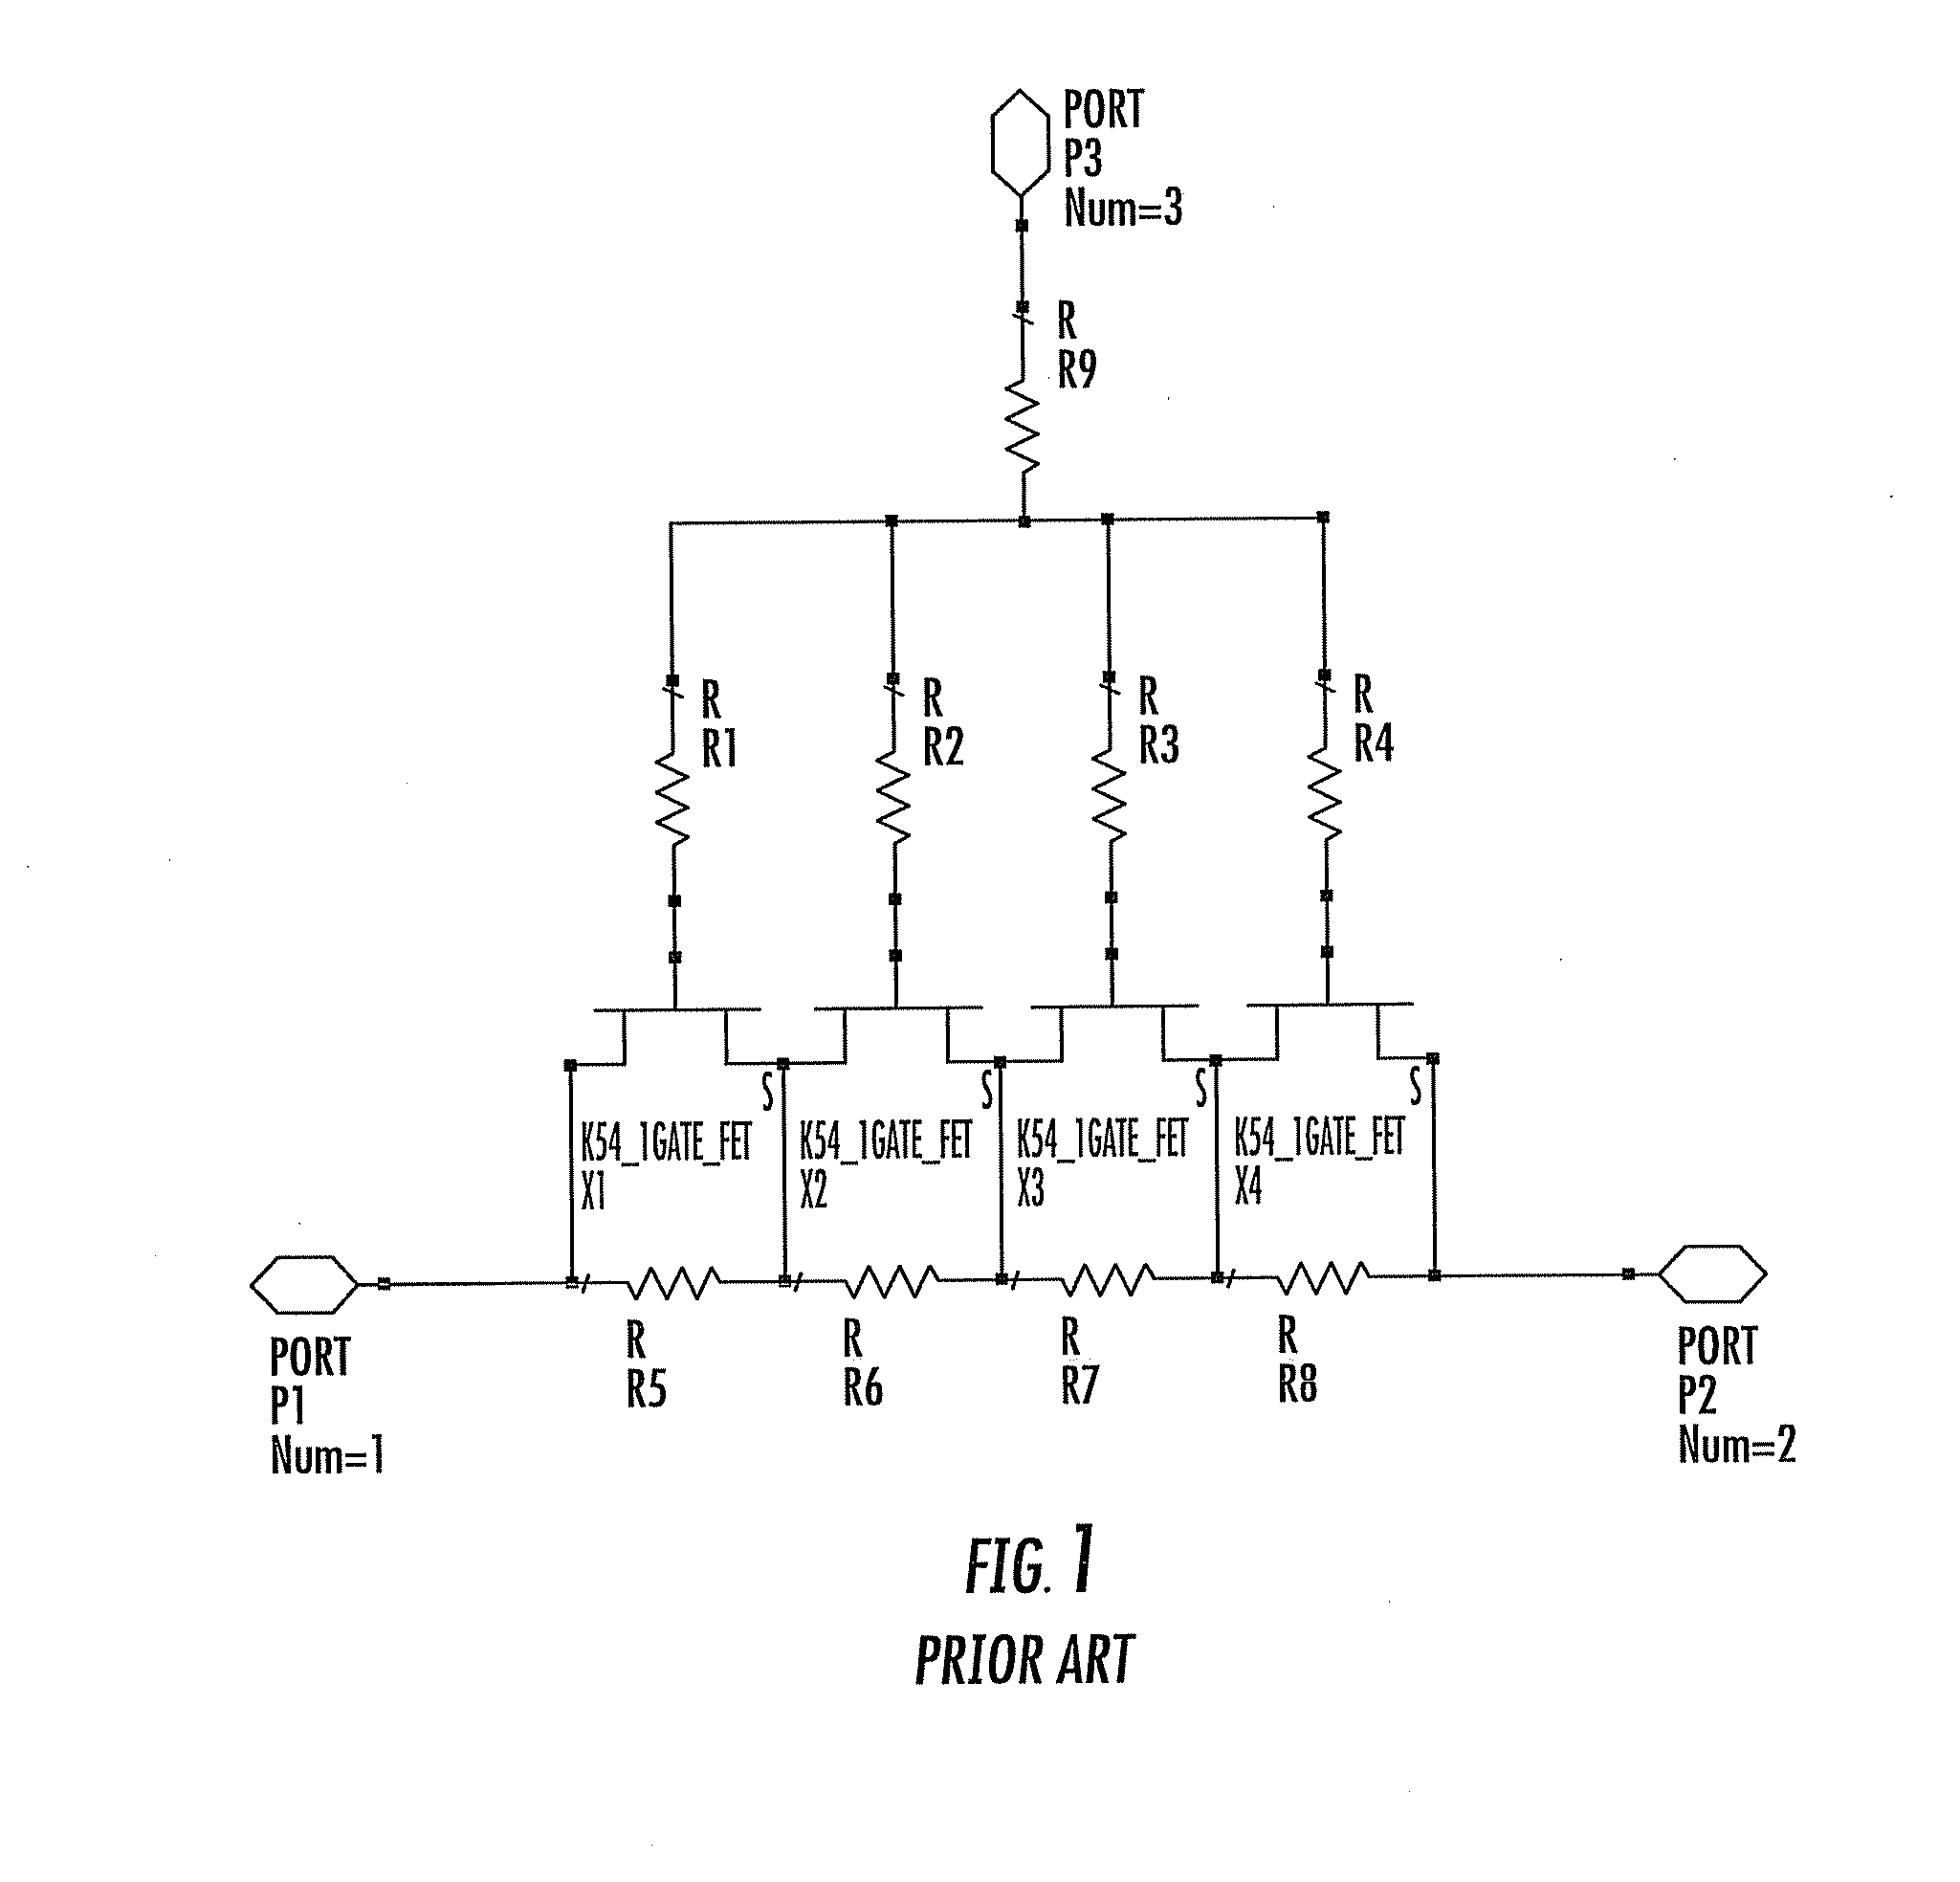 Radio frequency switch with improved intermodulation distortion through use of feed forward capacitor